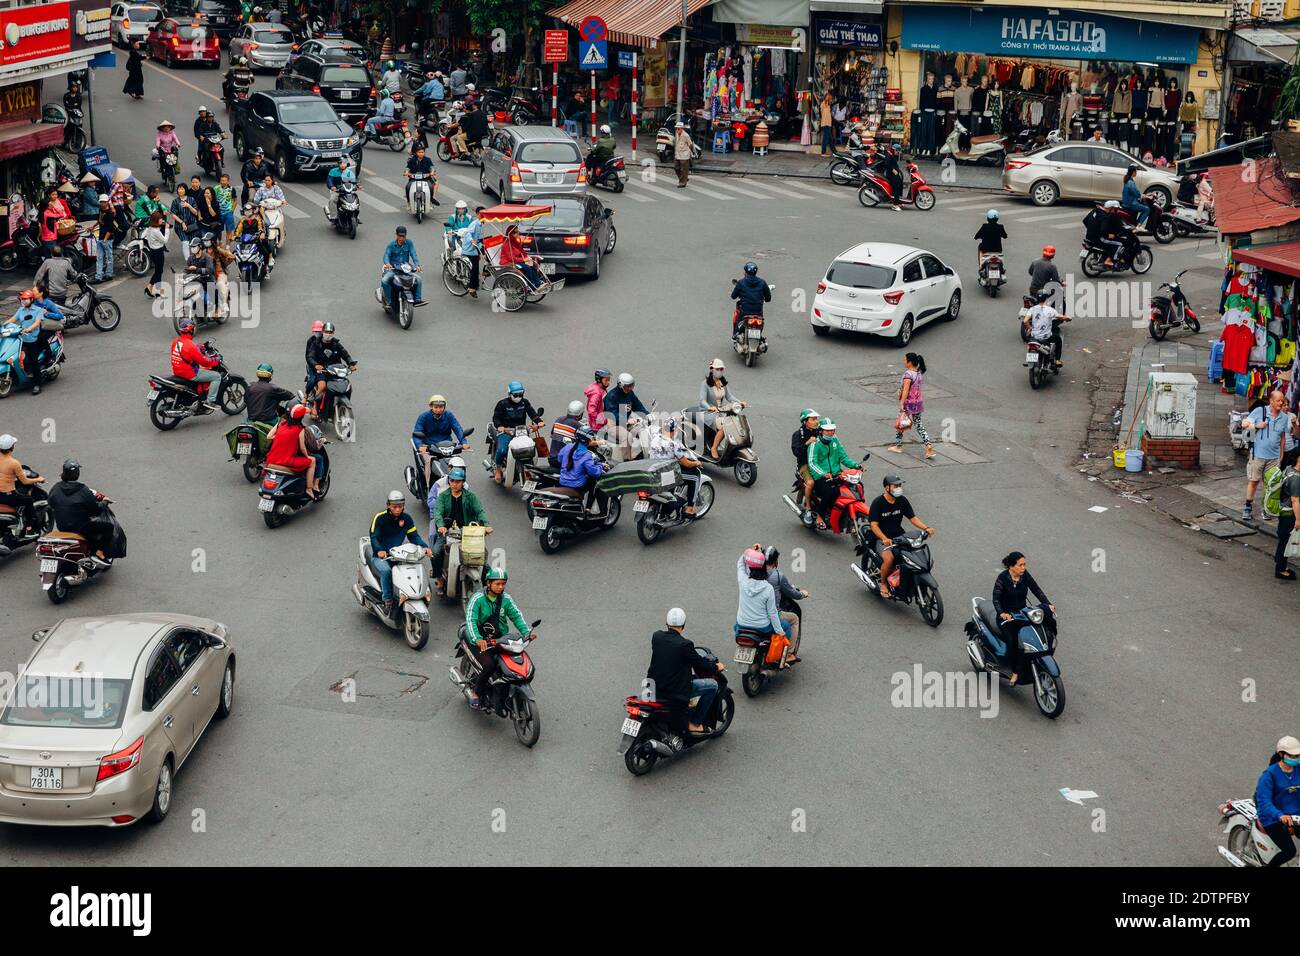 Hanoi, Vietnam - October 16, 2018: View of a famous chaotic traffic at the Dong Kinh Nghia Thuc Square in the Old Quarter of Hanoi. Stock Photo